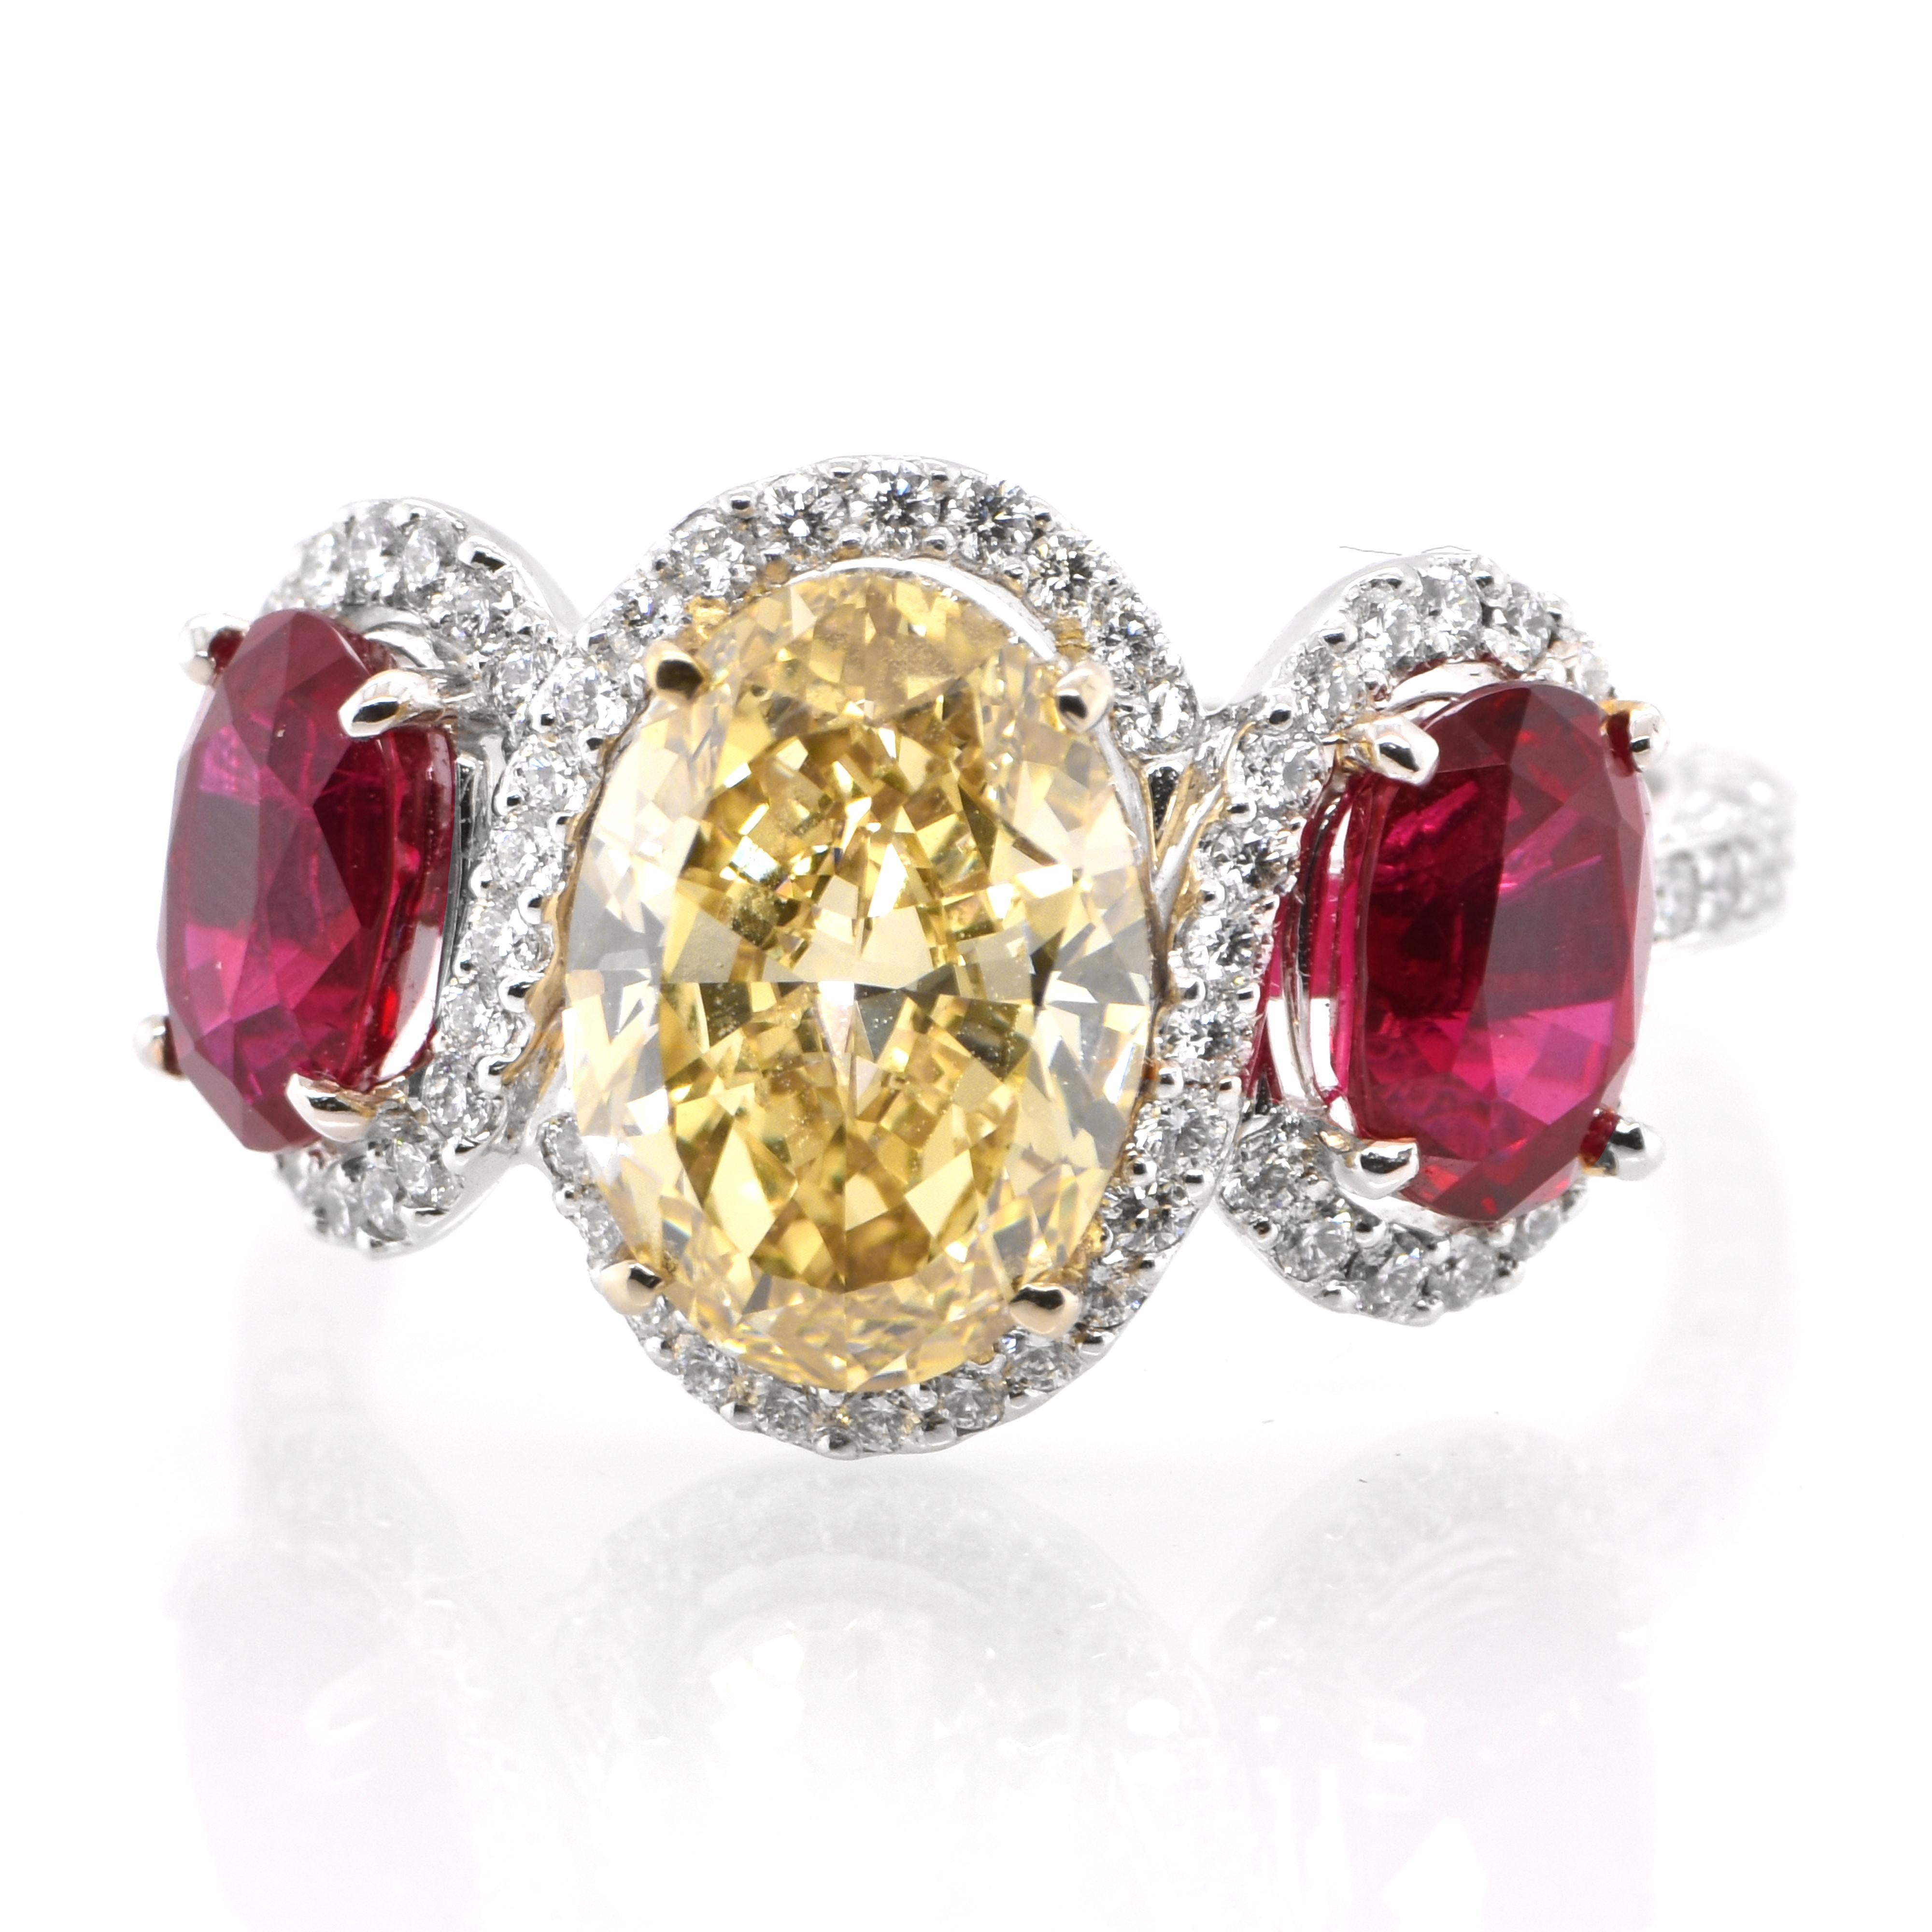 A three stone ring featuring a 2.417 Carat Natural Fancy Brownish Yellow Diamond and GIA Certified Pigeon Blood Ruby Ring set in Platinum. Diamonds have been adorned and cherished throughout human history and date back to thousands of years. They